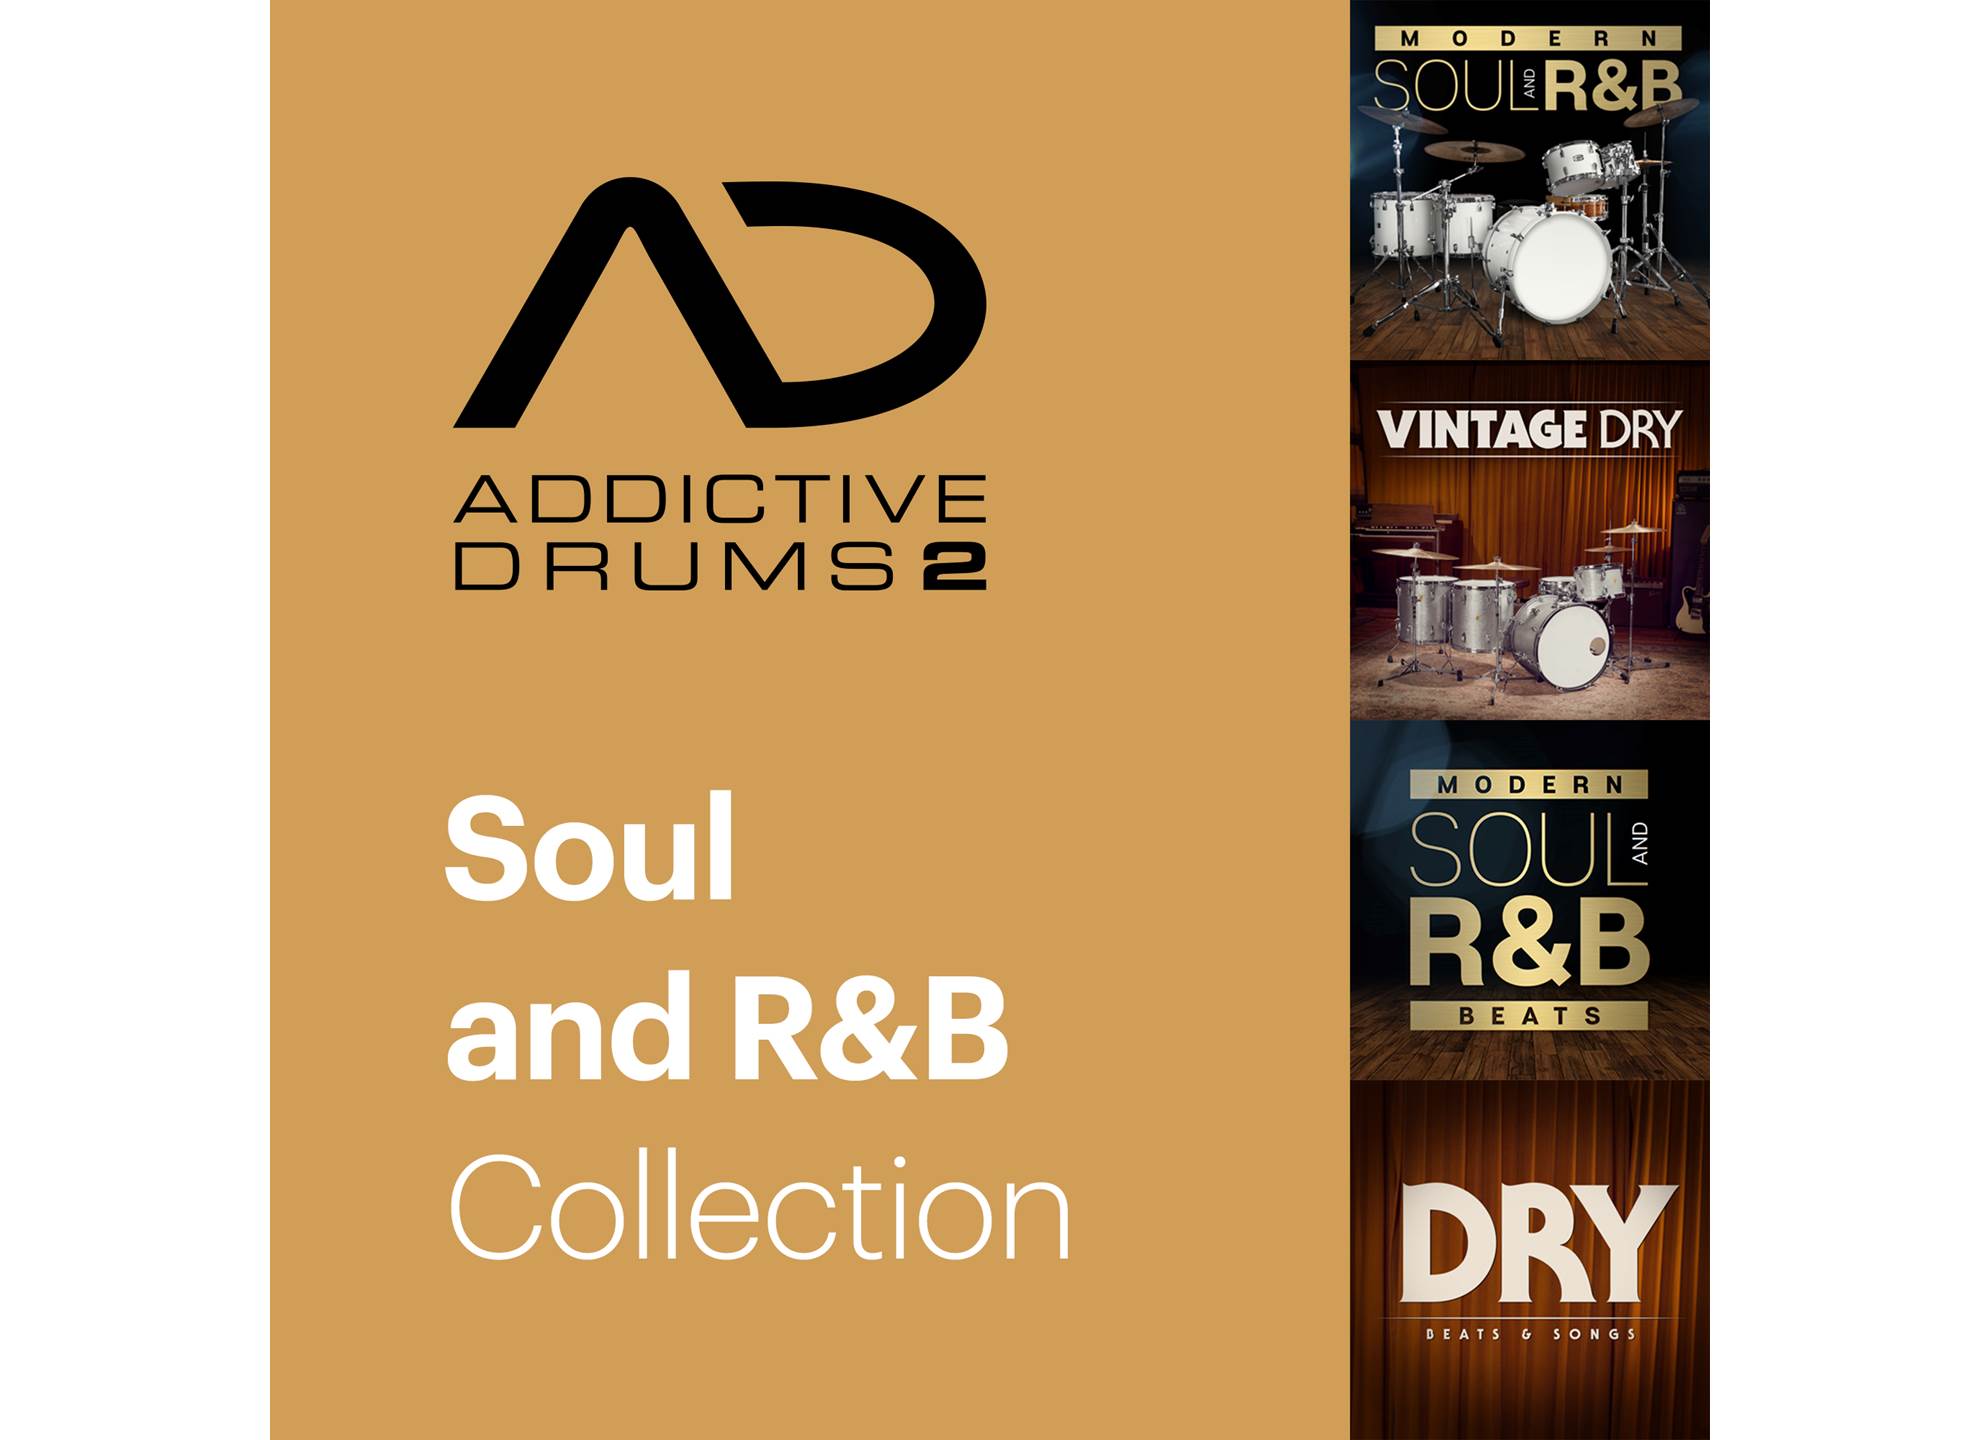 Addictive Drums 2: Soul And R&B Collection